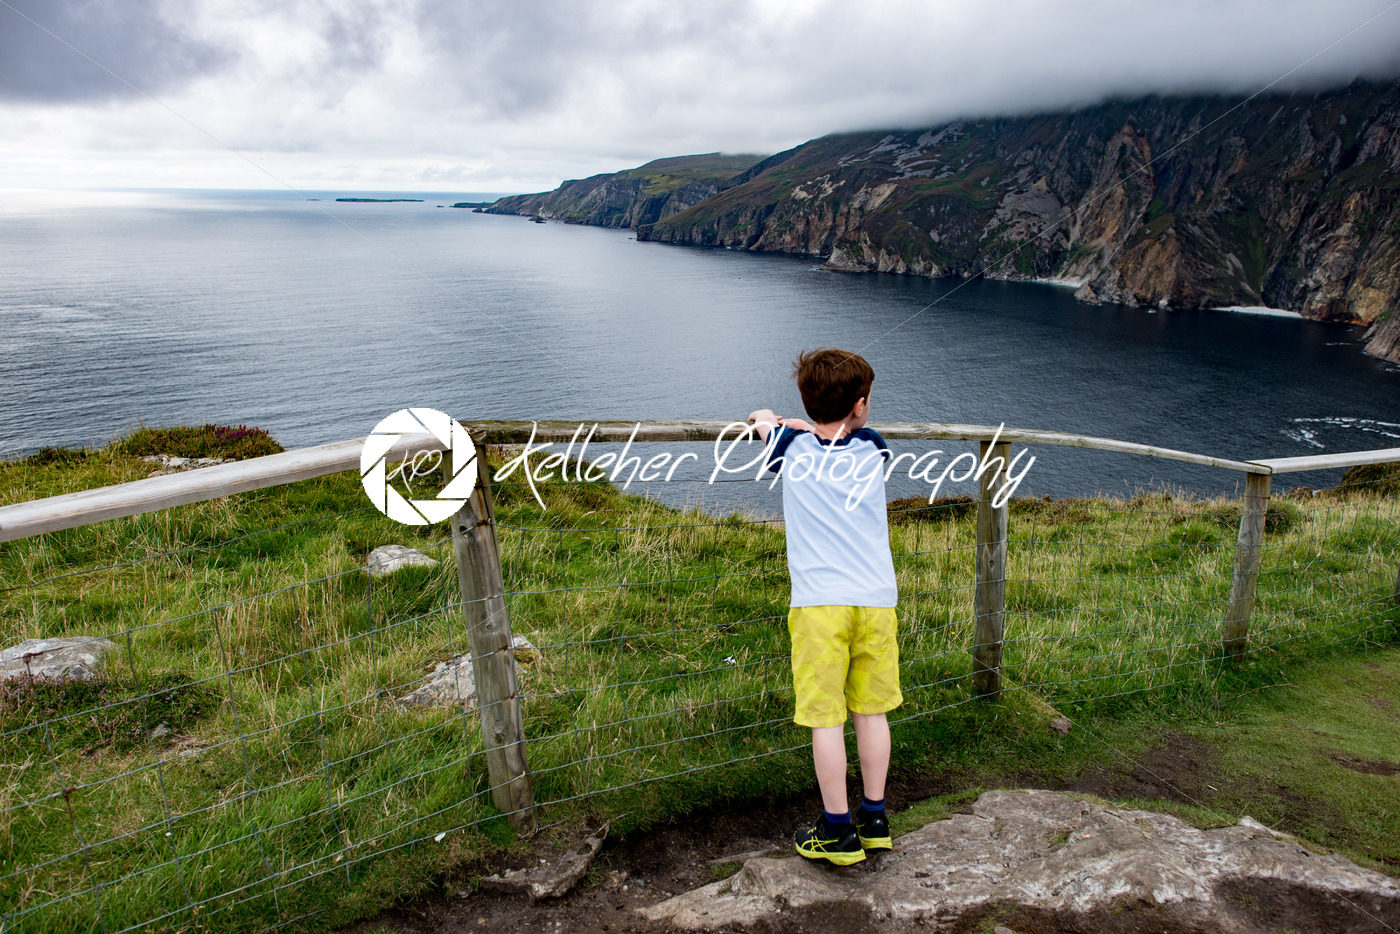 Boy looking out over Slieve League Cliffs, County Donegal, Ireland - Kelleher Photography Store